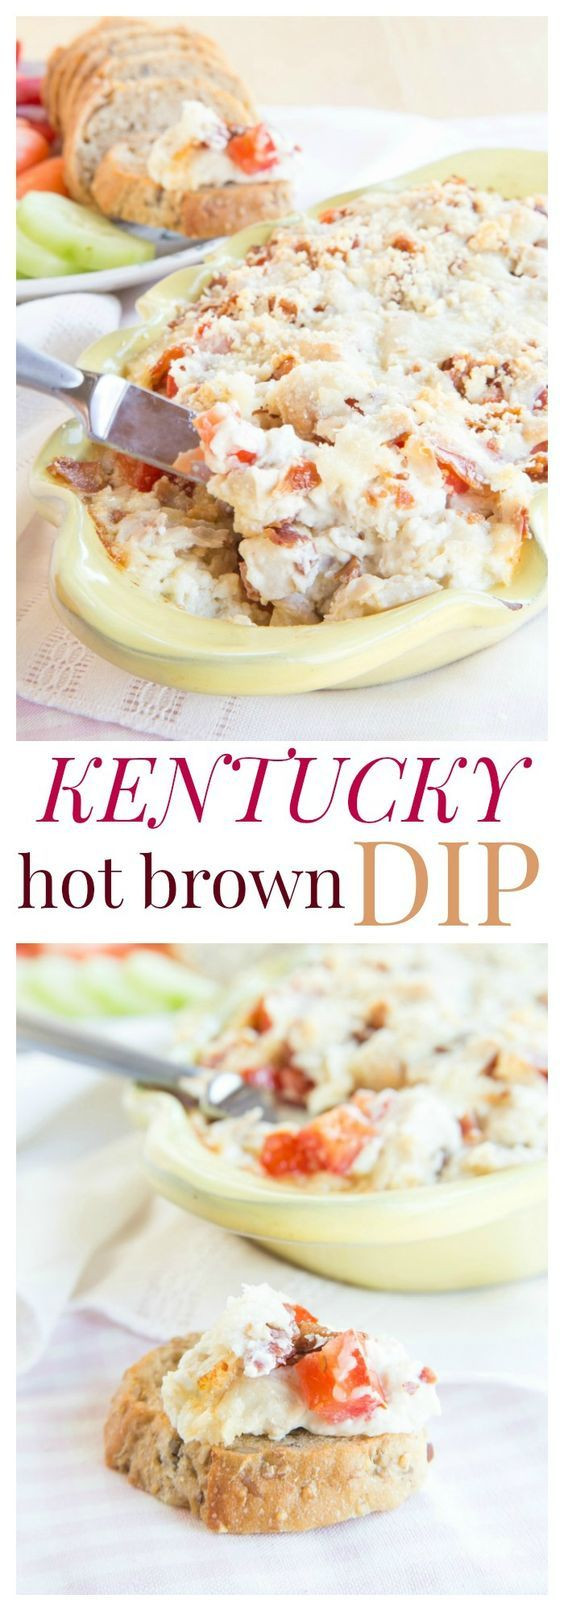 Hot Thanksgiving Appetizers
 17 Best ideas about Brown on Pinterest